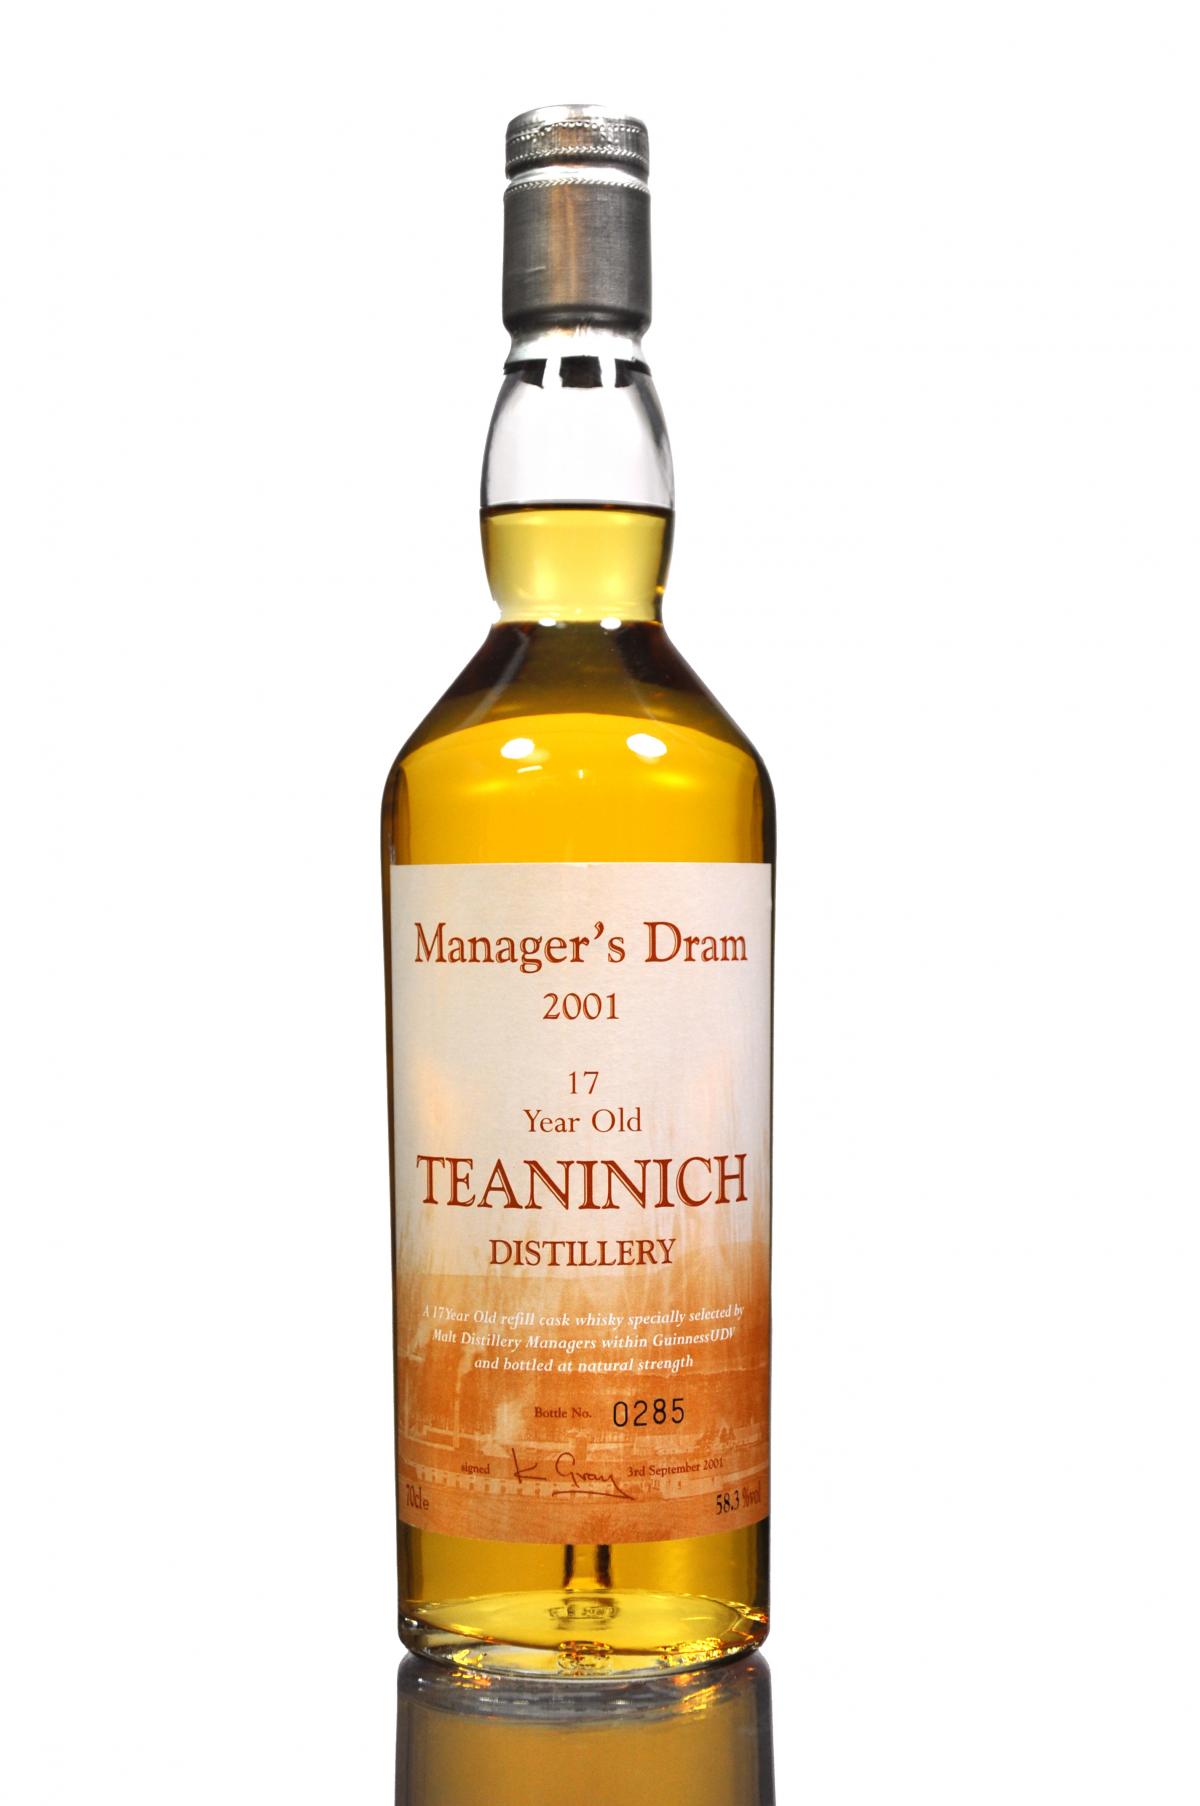 Teaninich 17 Year Old - Managers Dram 2001